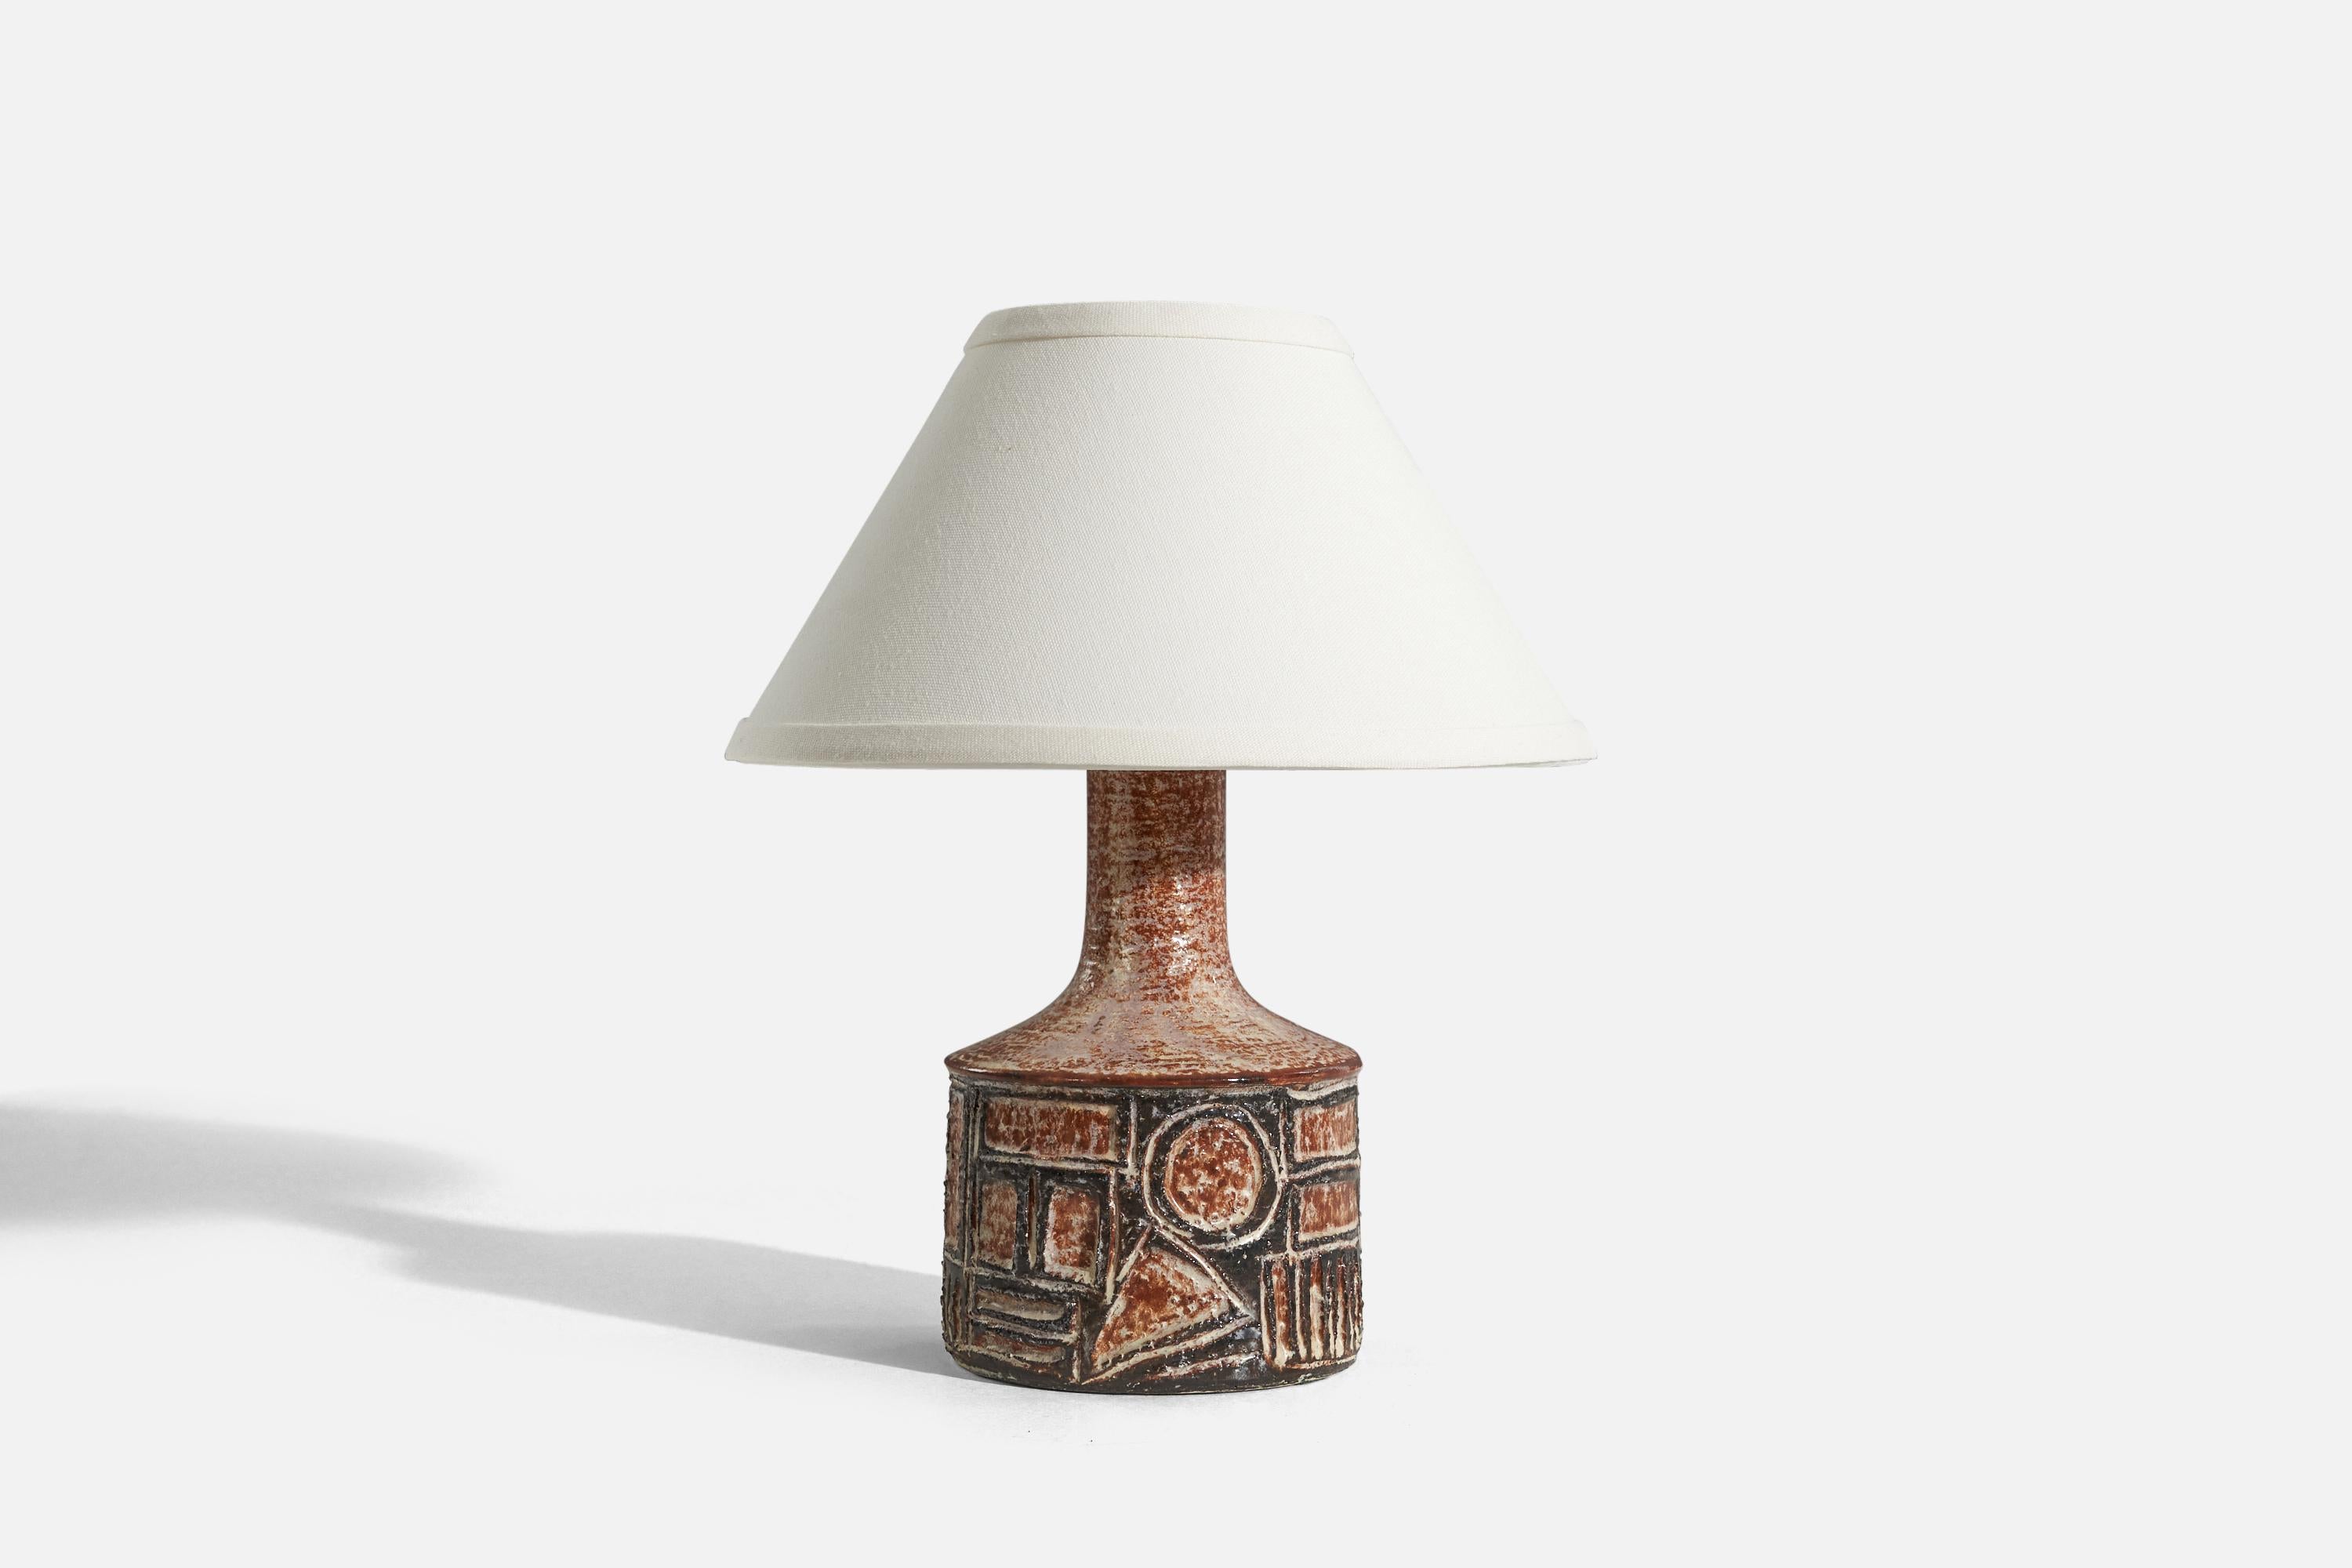 A black and red, glazed stoneware table lamp designed and produced by Jette Hellerøe, Denmark, 1960s.

Sold without lampshade. 
Dimensions of Lamp (inches) : 9.875 x 5 x 5 (H x W x D)
Dimensions of Shade (inches) : 4.25 x 10.25 x 6 (T x B x